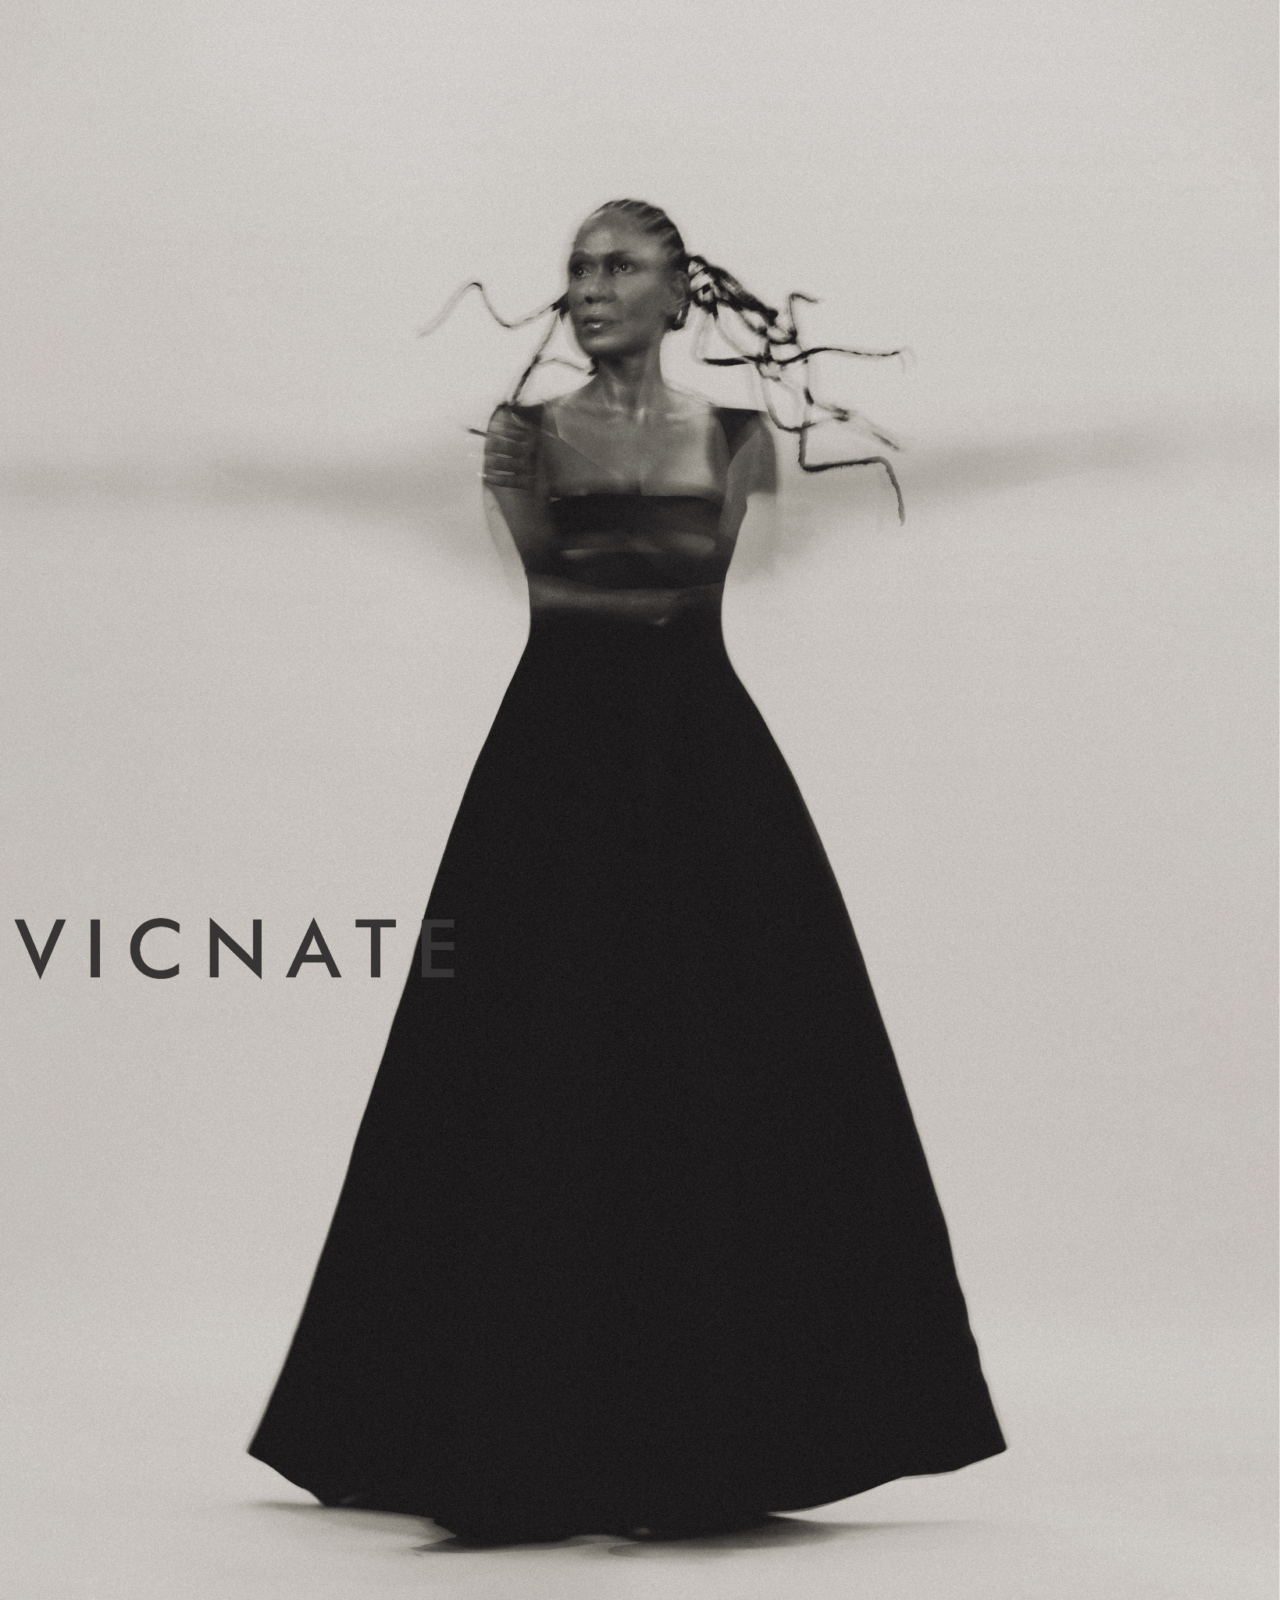 Blurry images from the VICNATE campaign shoot